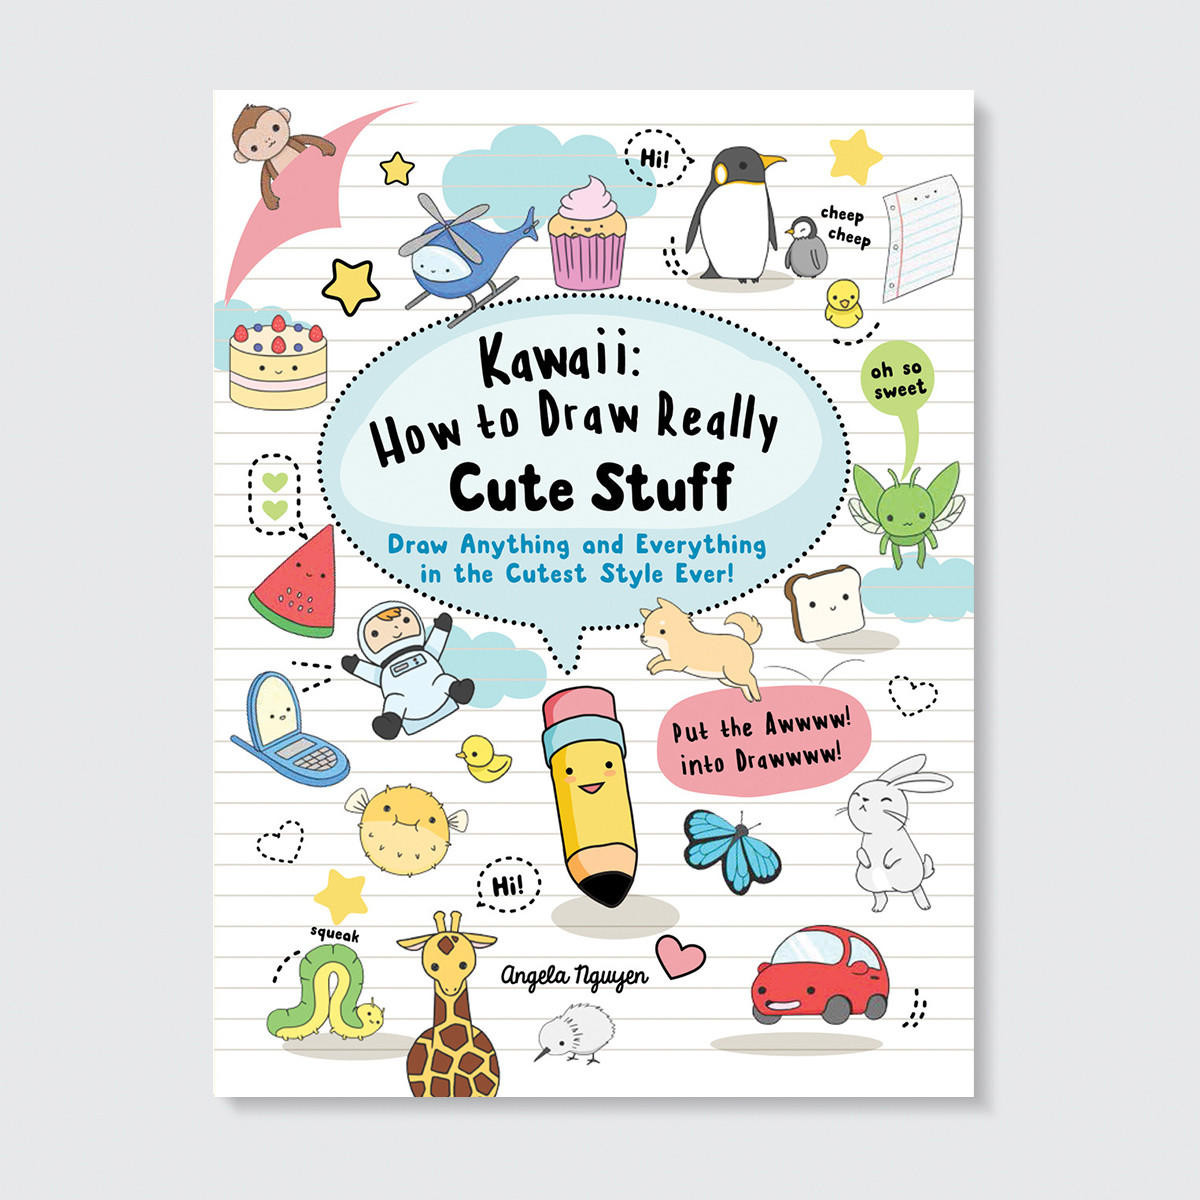 Search Press How To Draw Really Cute Stuff by Angela Nguyen